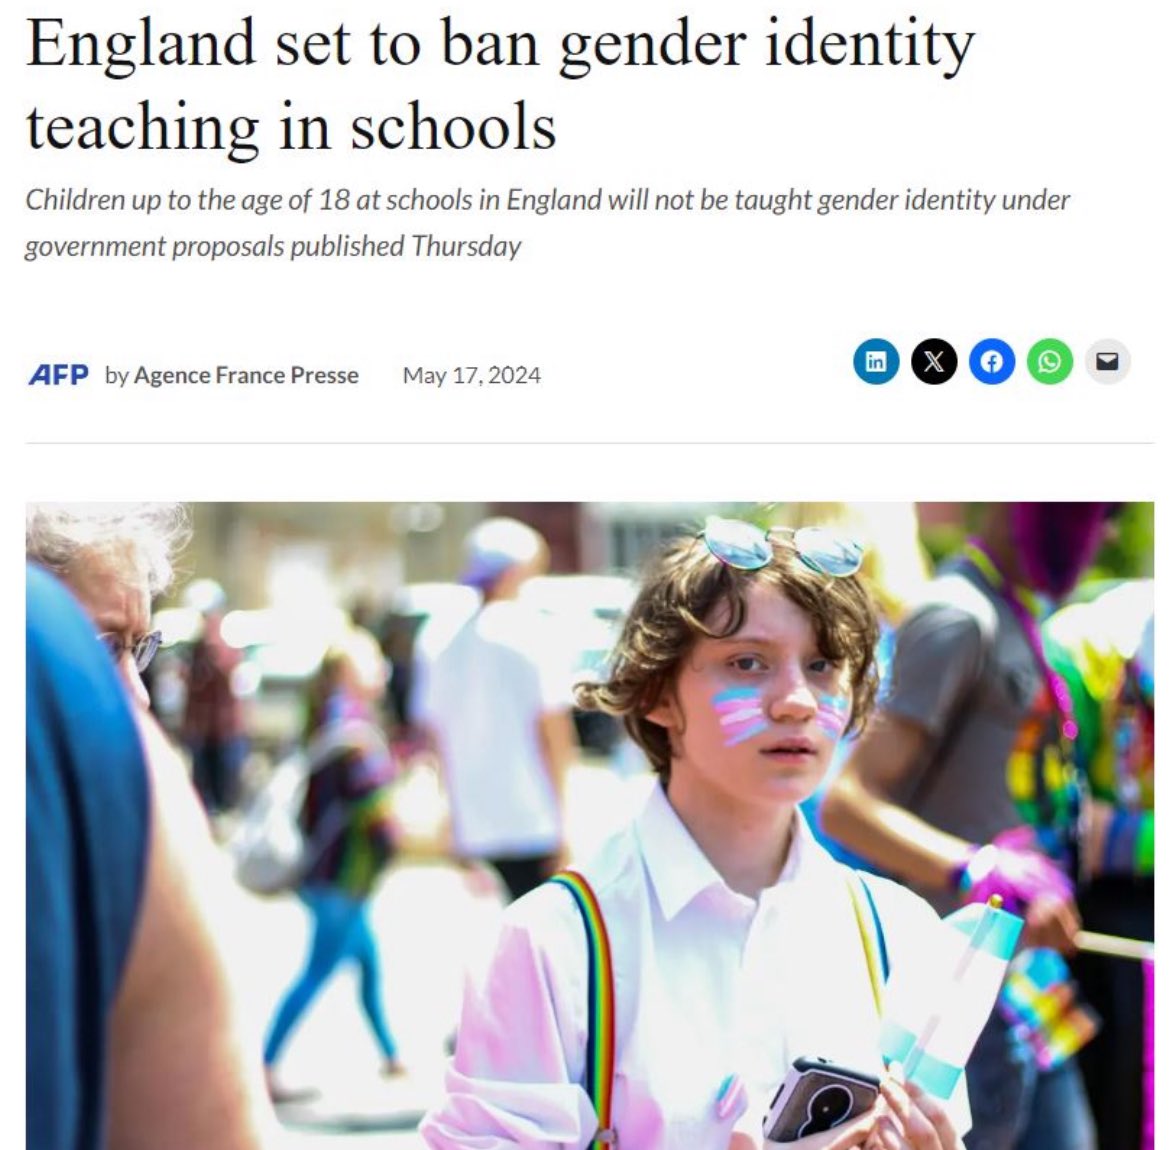 🇬🇧 Big news out of the UK! Children up to the age of 18 at schools in England will no longer be taught gender identity under new government proposals. The move follows a landmark review which last month urged “extreme caution” on prescribing masculinising or feminising hormone